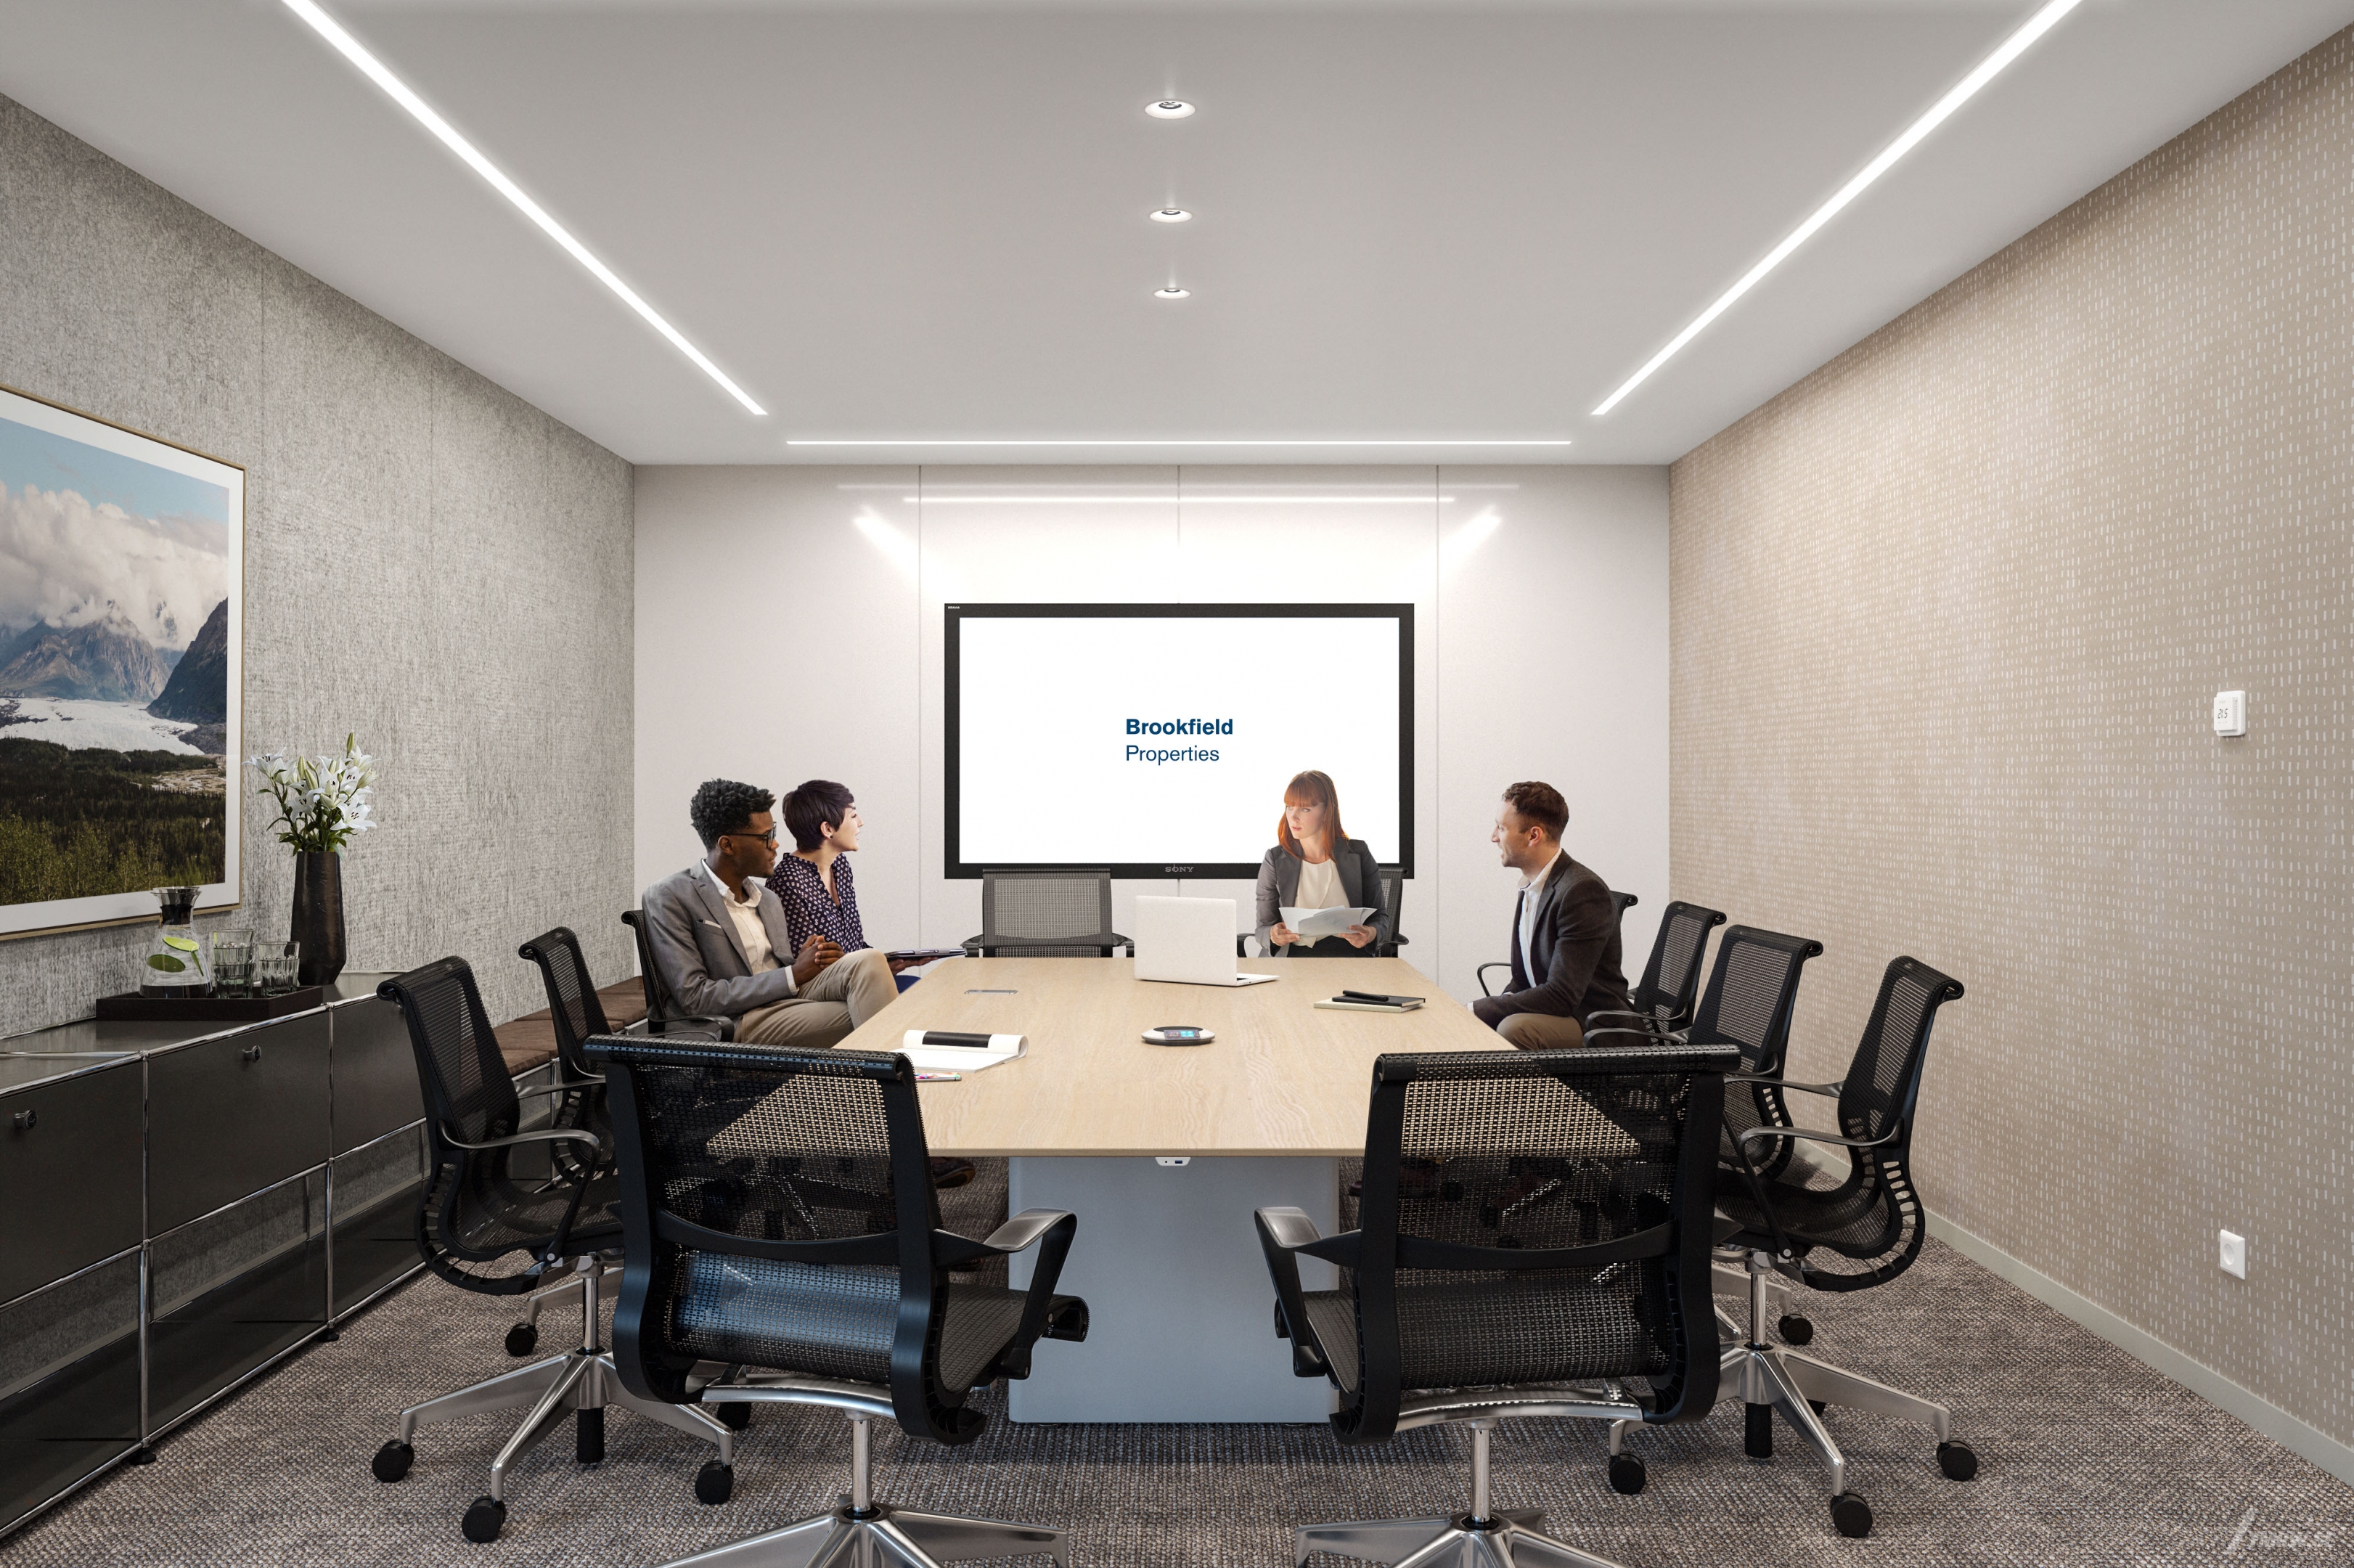 Architectural visualization of OMW for Brookfield Properties. An image of the interior of a office with people sitting a conference room in daylight.